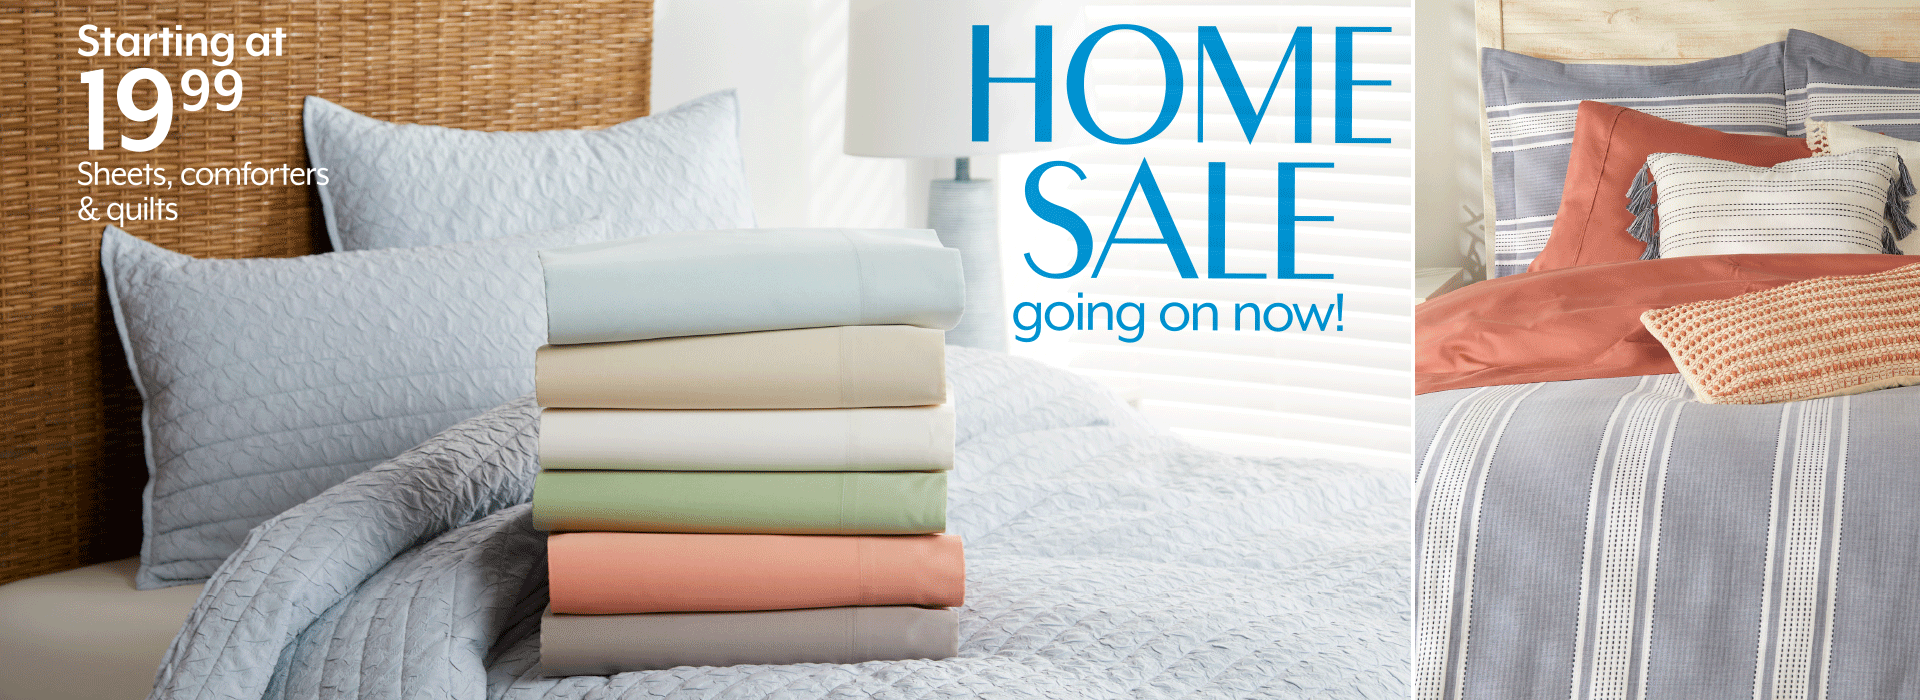 STARTING AT 19.99 Sheets, comforters & quilts